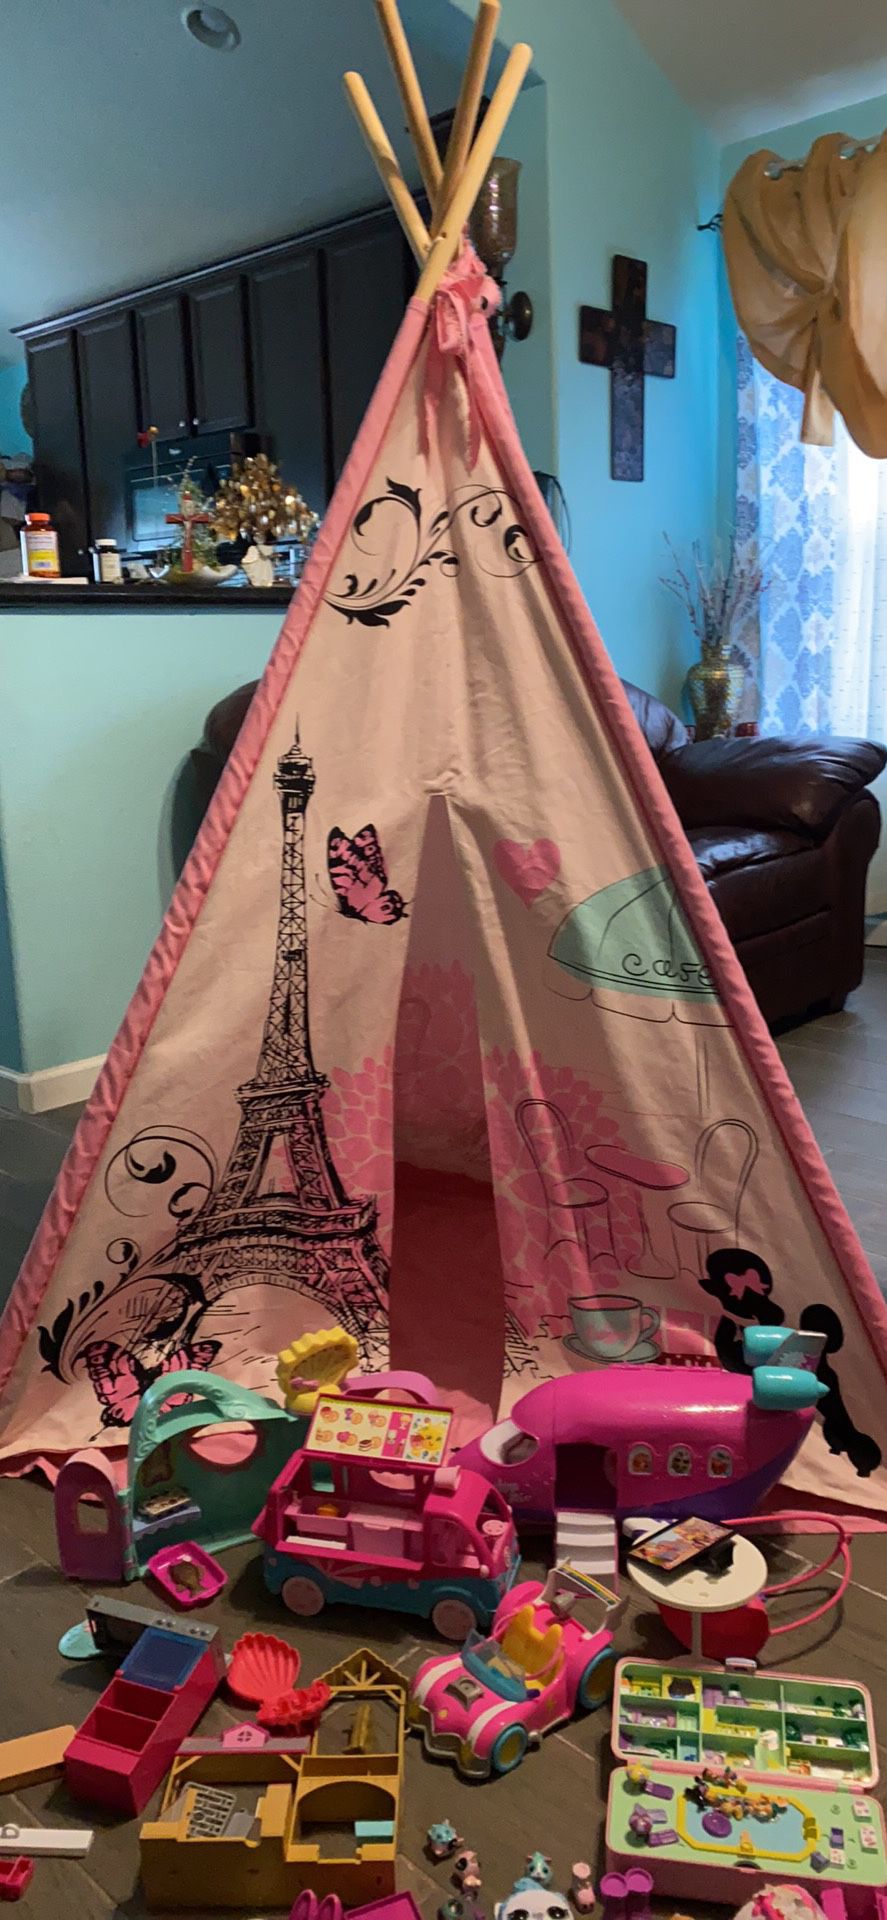 Casita,Silla y Juguetes / Teepee, Chair And Toys